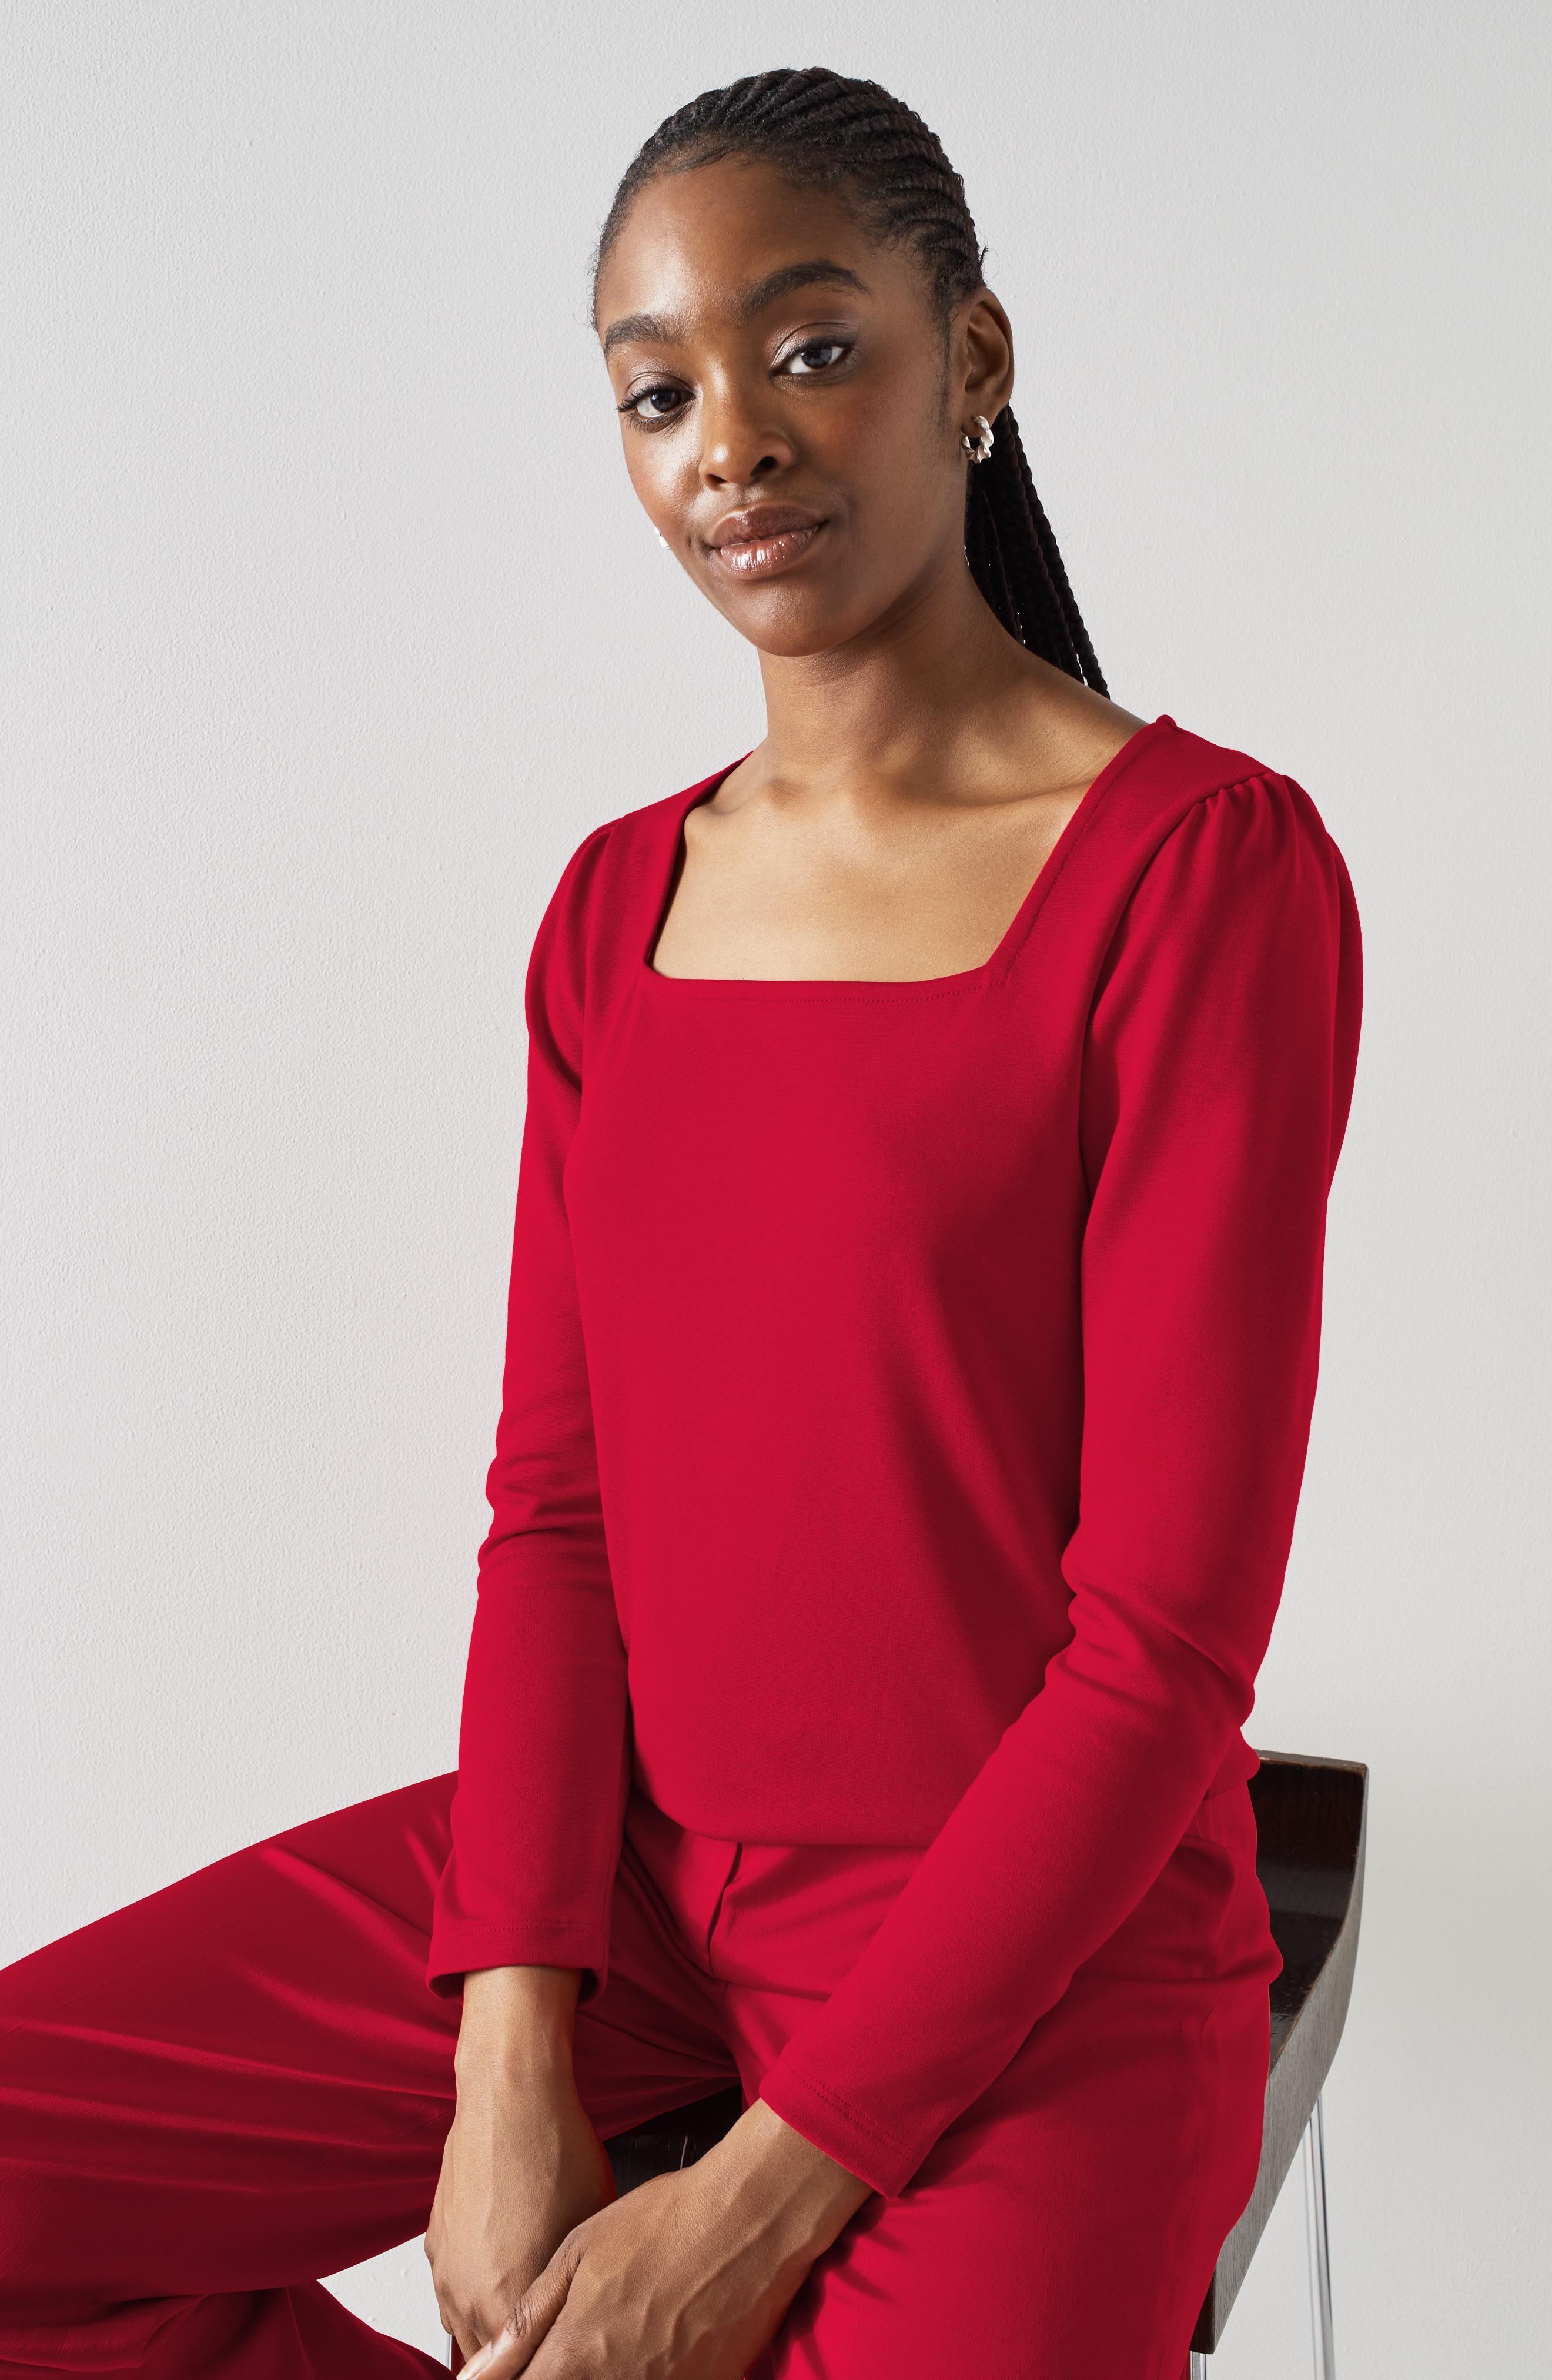 L.K.Bennett Alex Red  Square Neck Top with LENZING ECOVERO viscose, Cherry